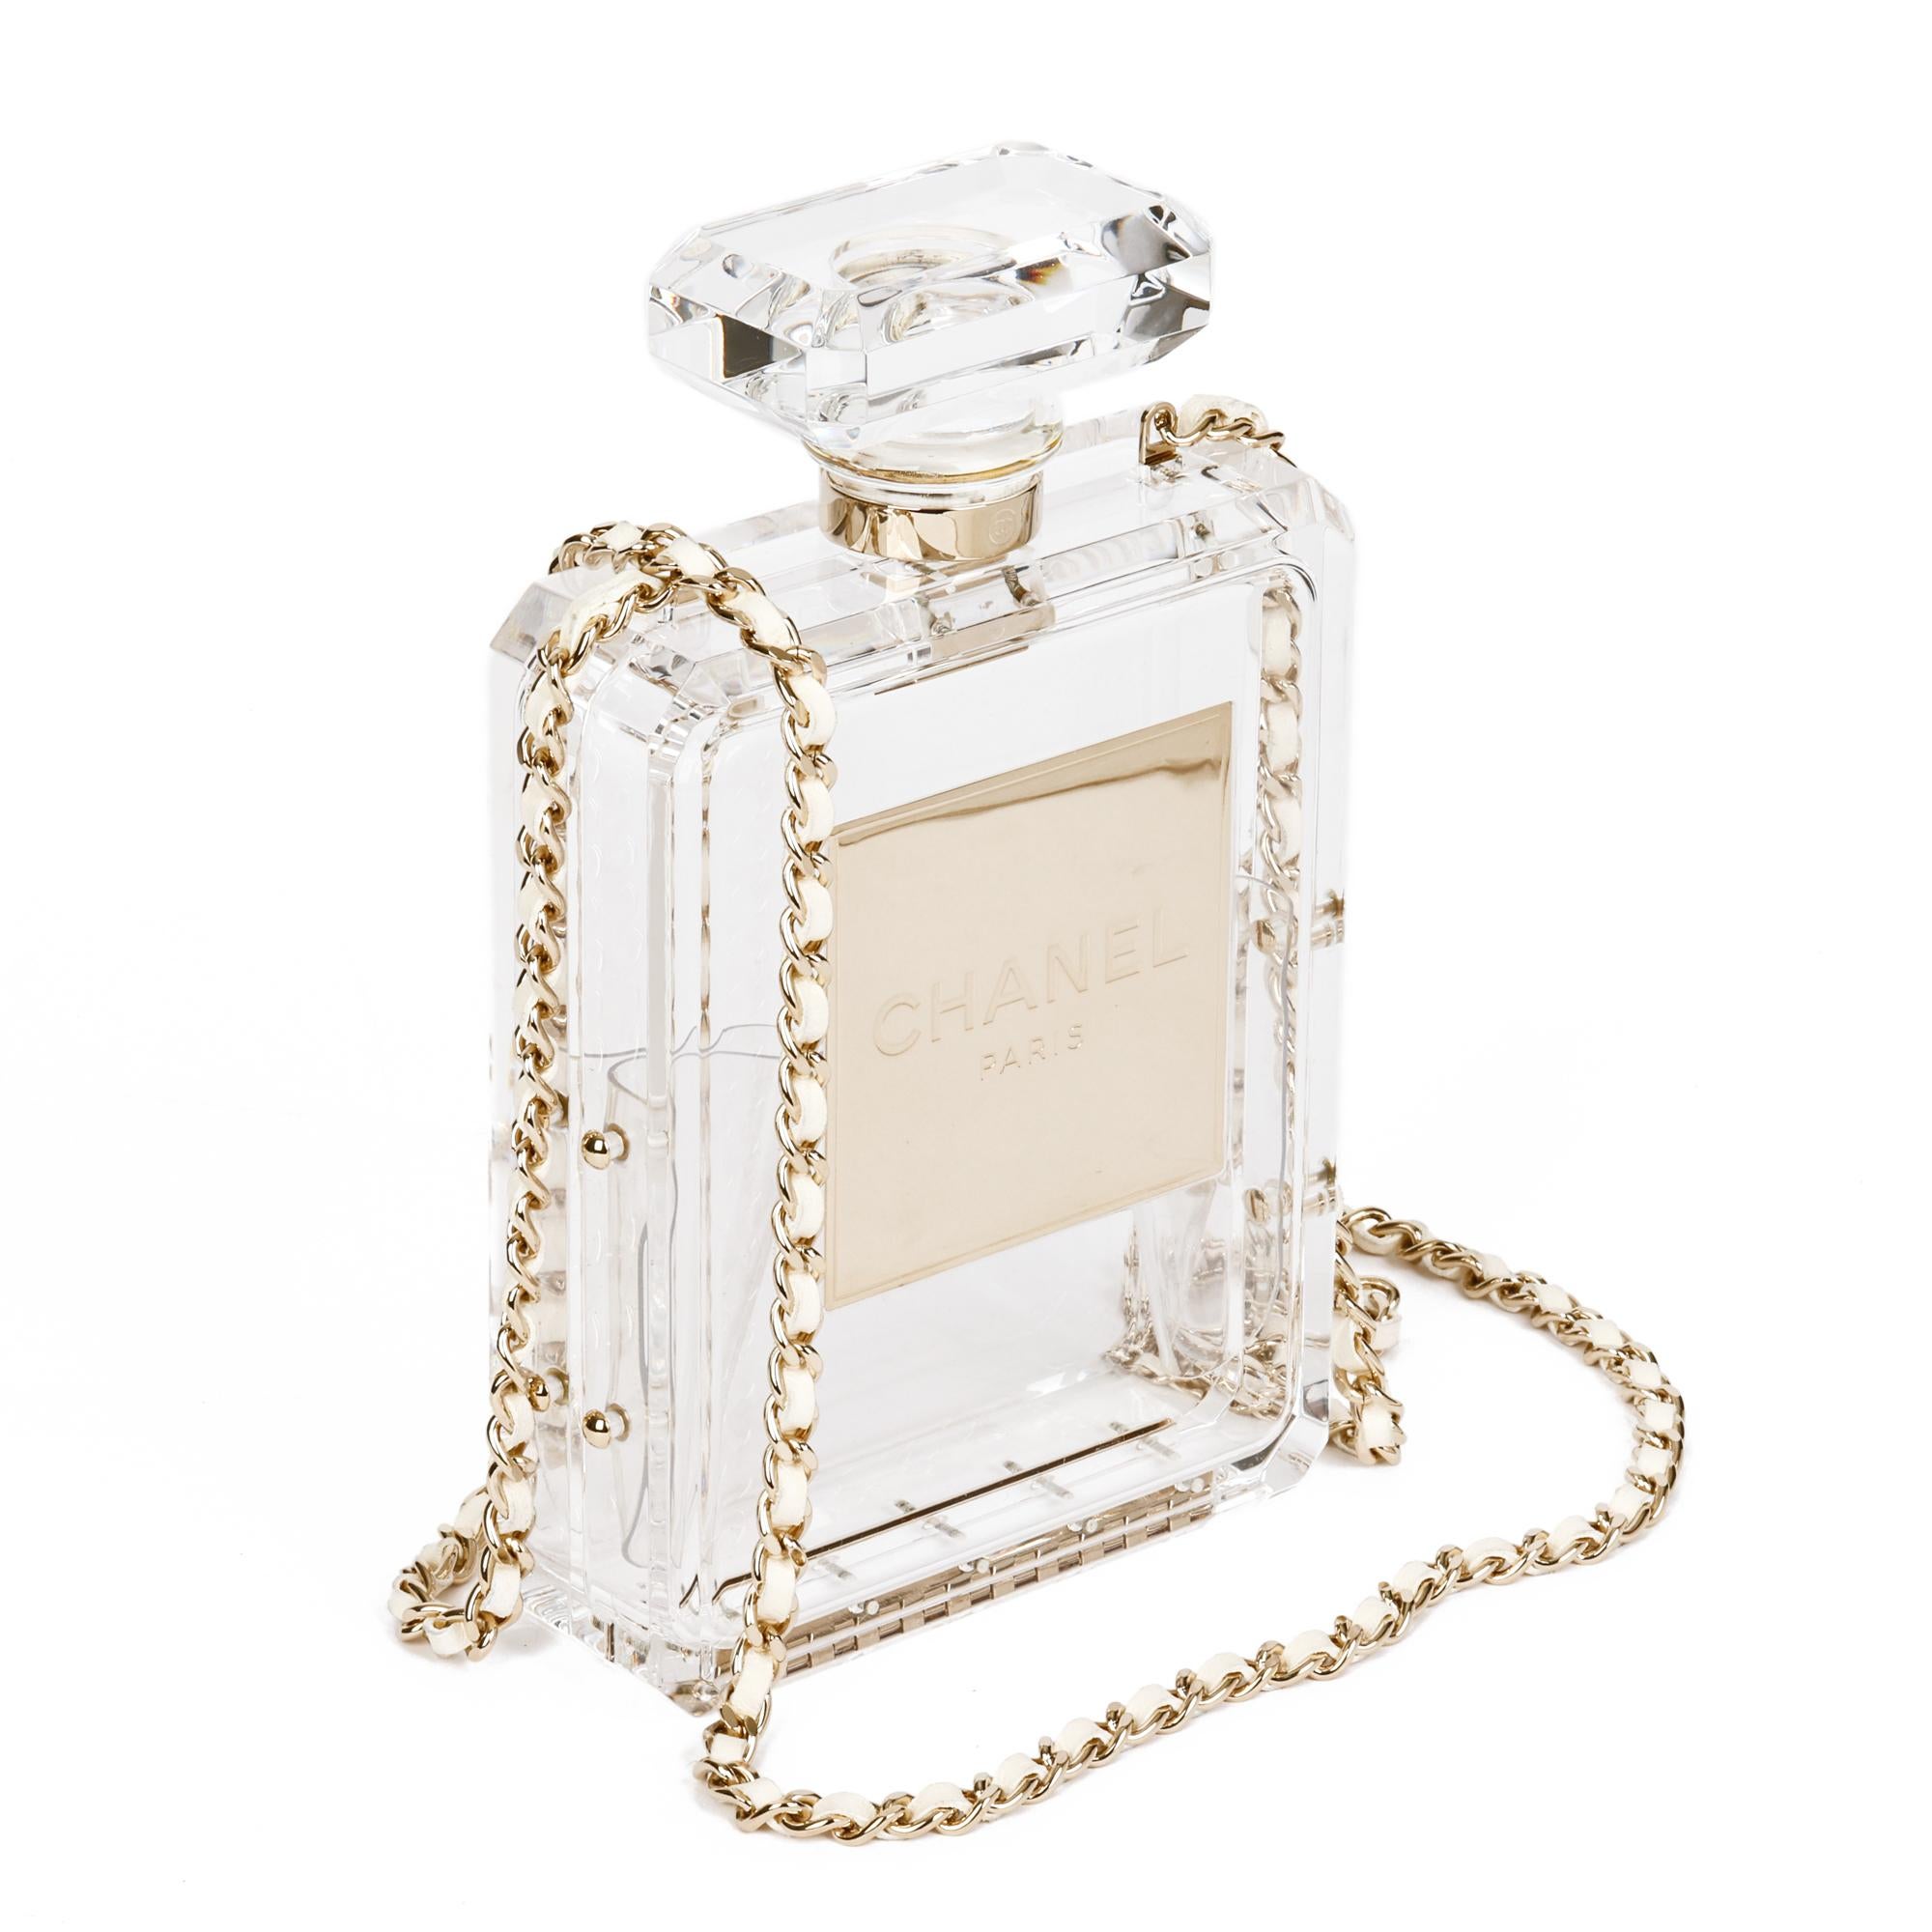 Chanel Clear Plexiglass Perfume Bottle Minaudière

CONDITION NOTES
The exterior is in exceptional condition with minimal signs of use.
The interior is in exceptional condition with minimal signs of use.
The hardware is in excellent condition with